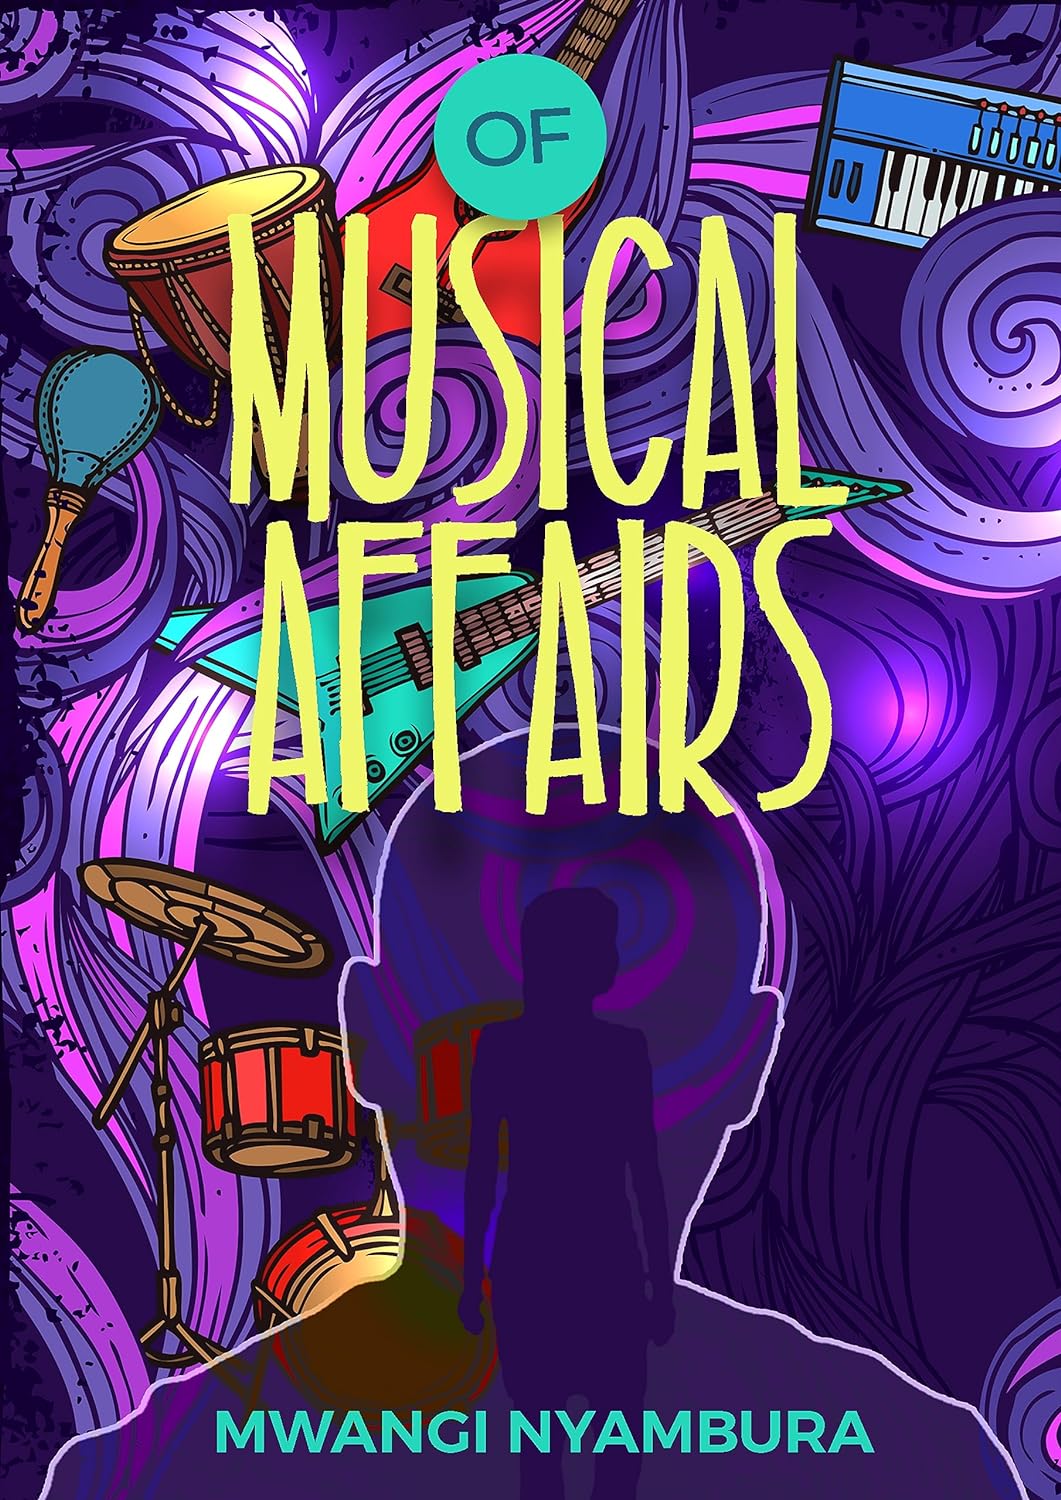 Of Musical Affairs